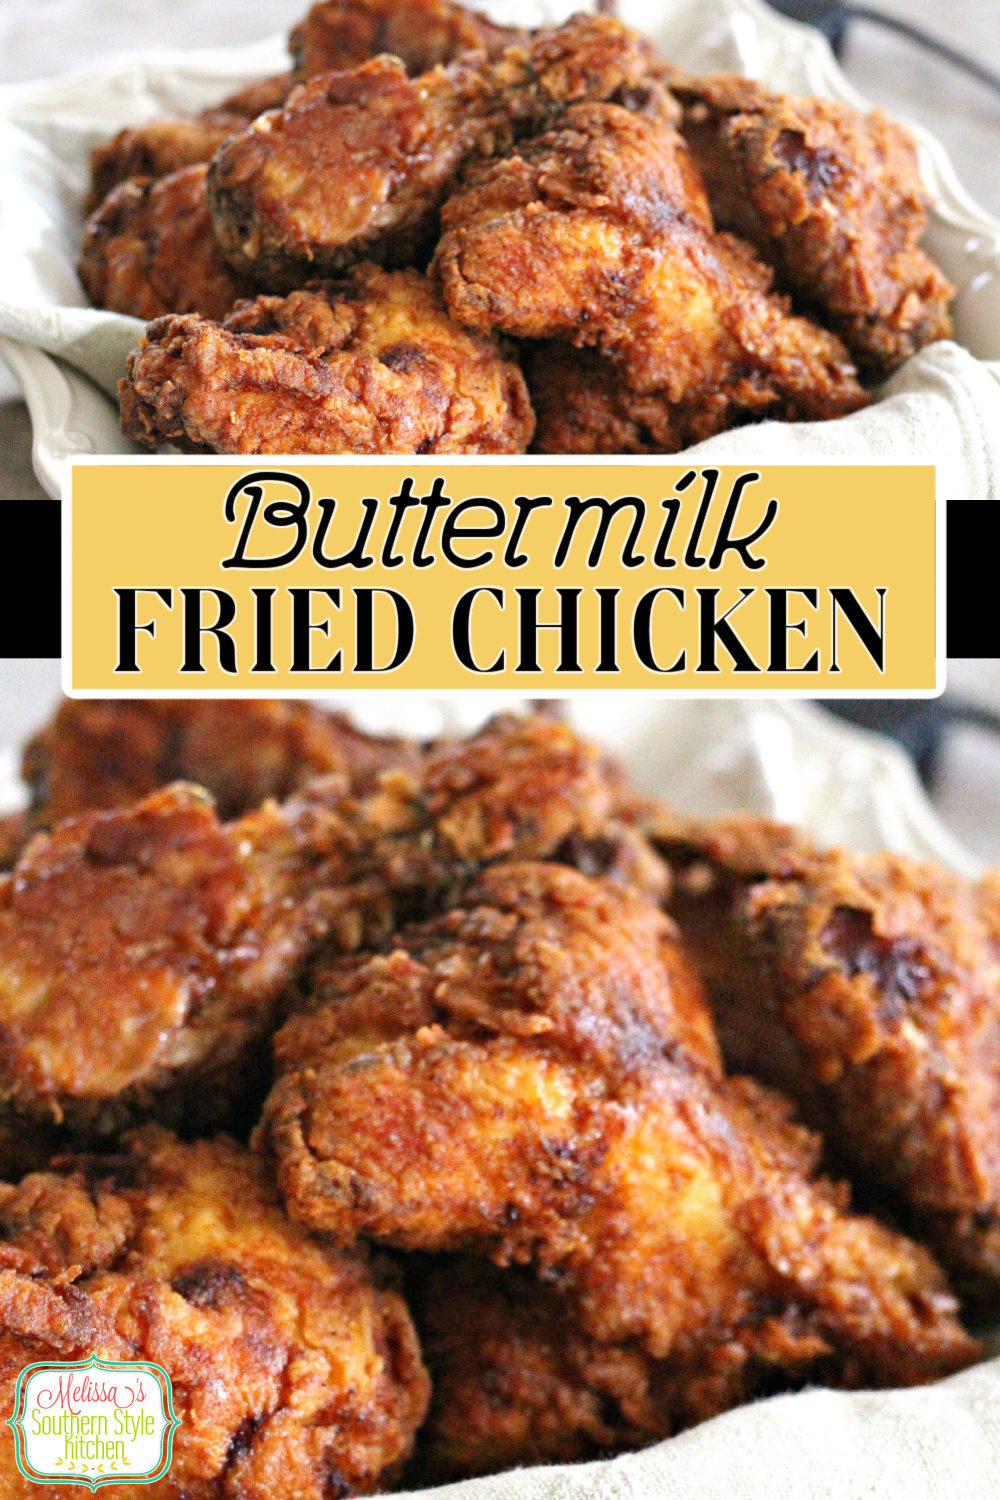 This Southern Buttermilk Fried Chicken recipe is juicy on the inside with a crispy coating that's finger licking good. #friedchicken #buttermilkfriedchicken #friedchickenrecipes #southernfriedchicken #buttermilkfriedchicken #chickenrecipes #dinner #dinnerideas #southernfood #southernrecipes #easyrecipes via @melissasssk